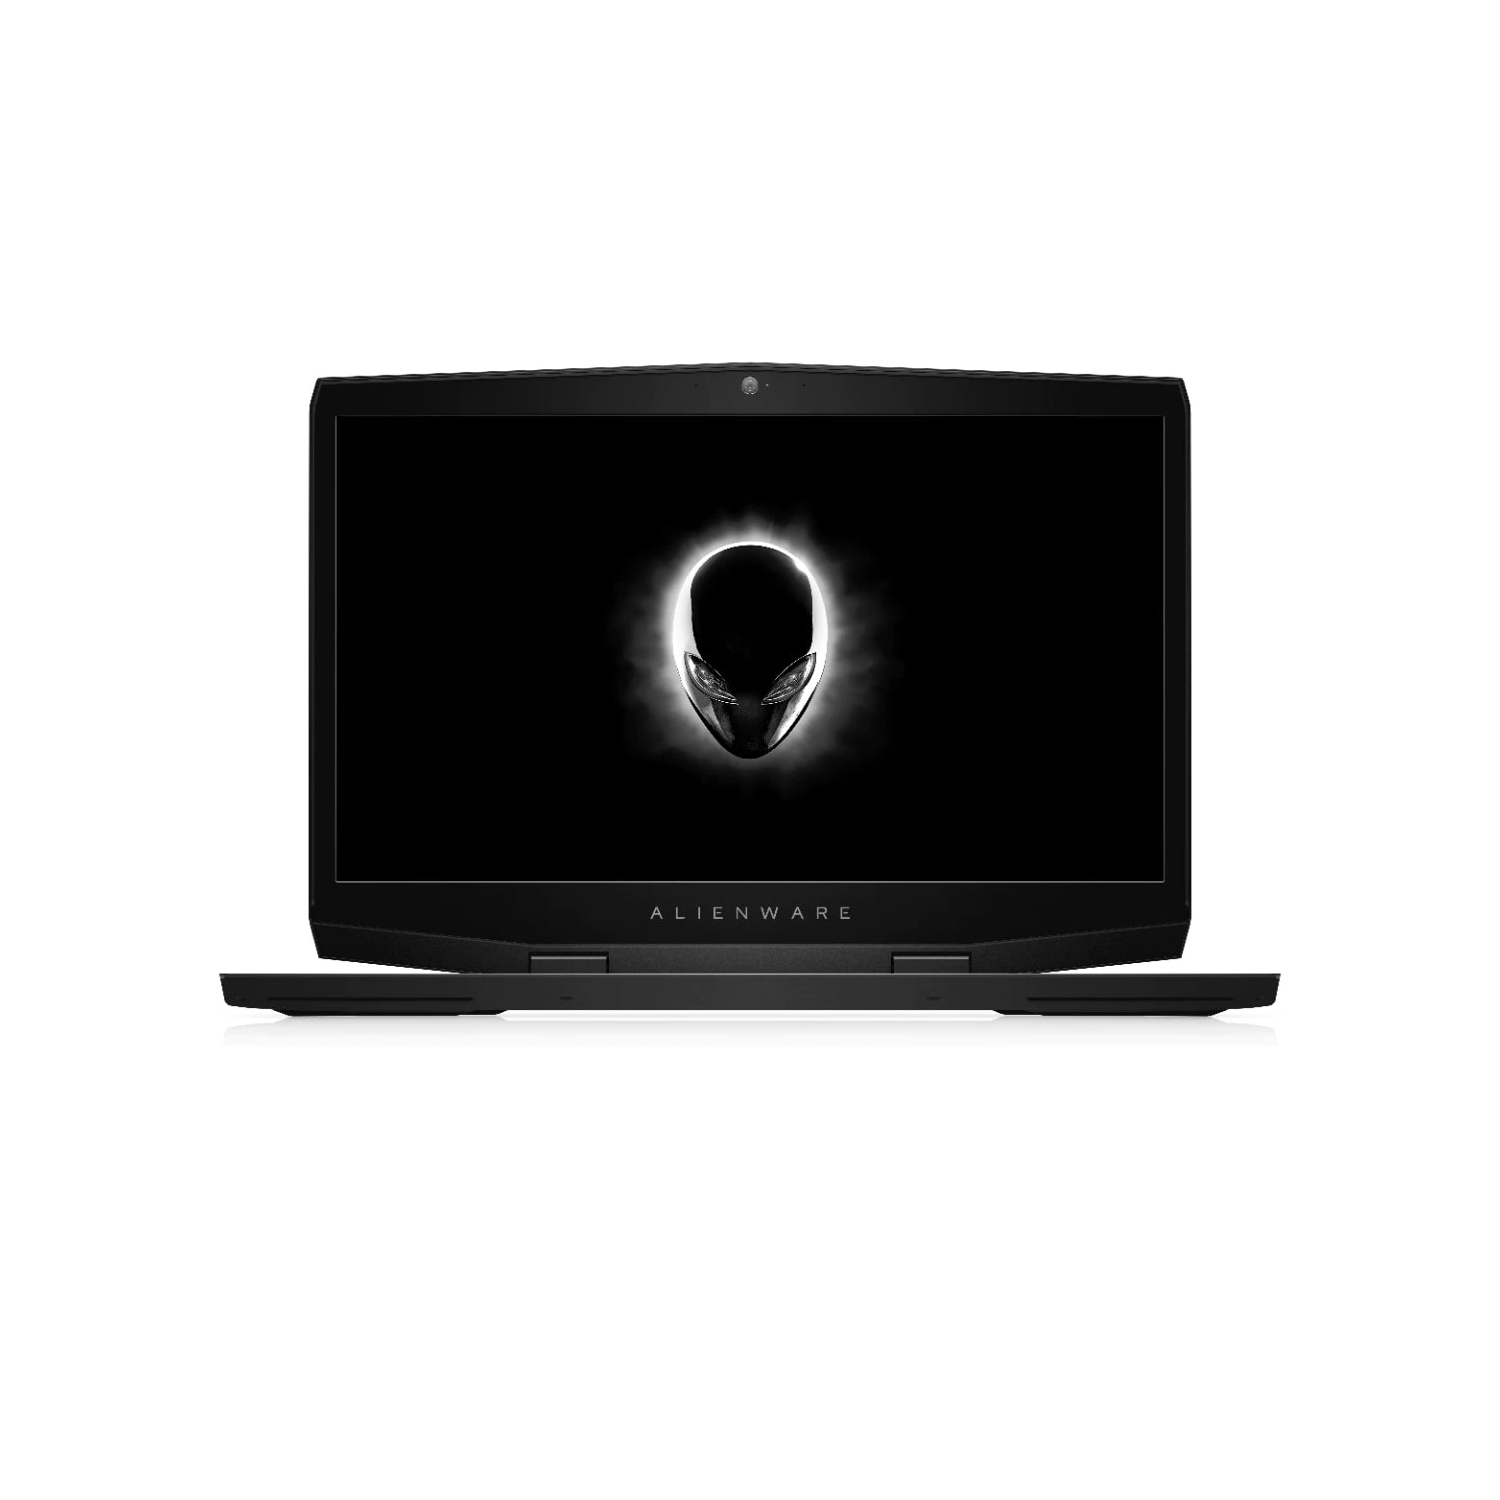 Refurbished (Excellent) – Dell Alienware m17 Gaming Laptop (2018) | 17.3" FHD | Core Ryzen 9 - 1TB SSD - 16GB RAM - RTX 3080 | 8 Cores @ 4.9 GHz - 8GB GDDR6X